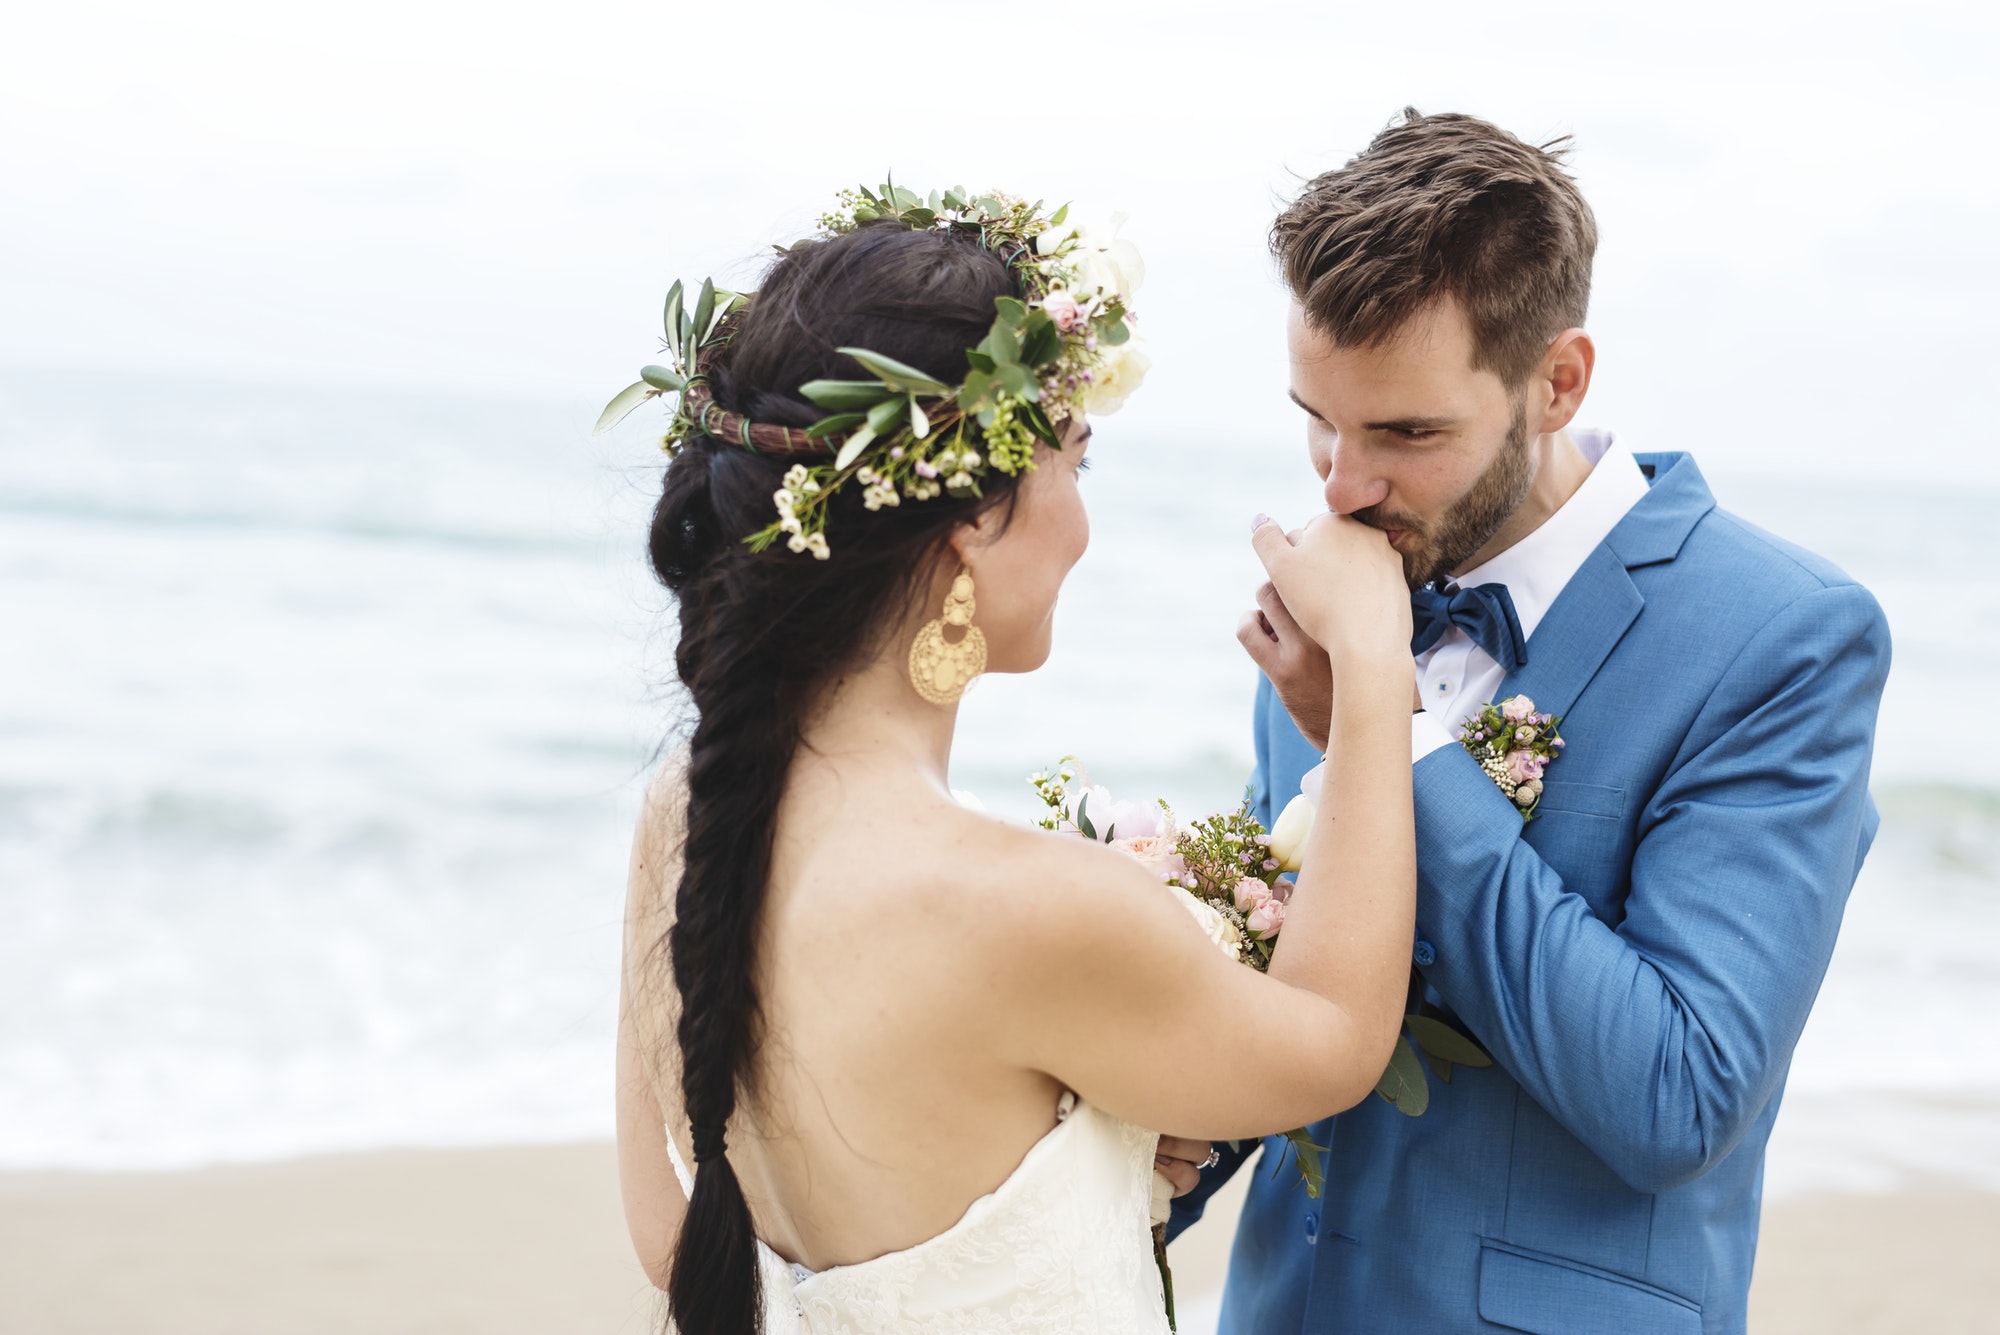 Young couple getting married at the beach